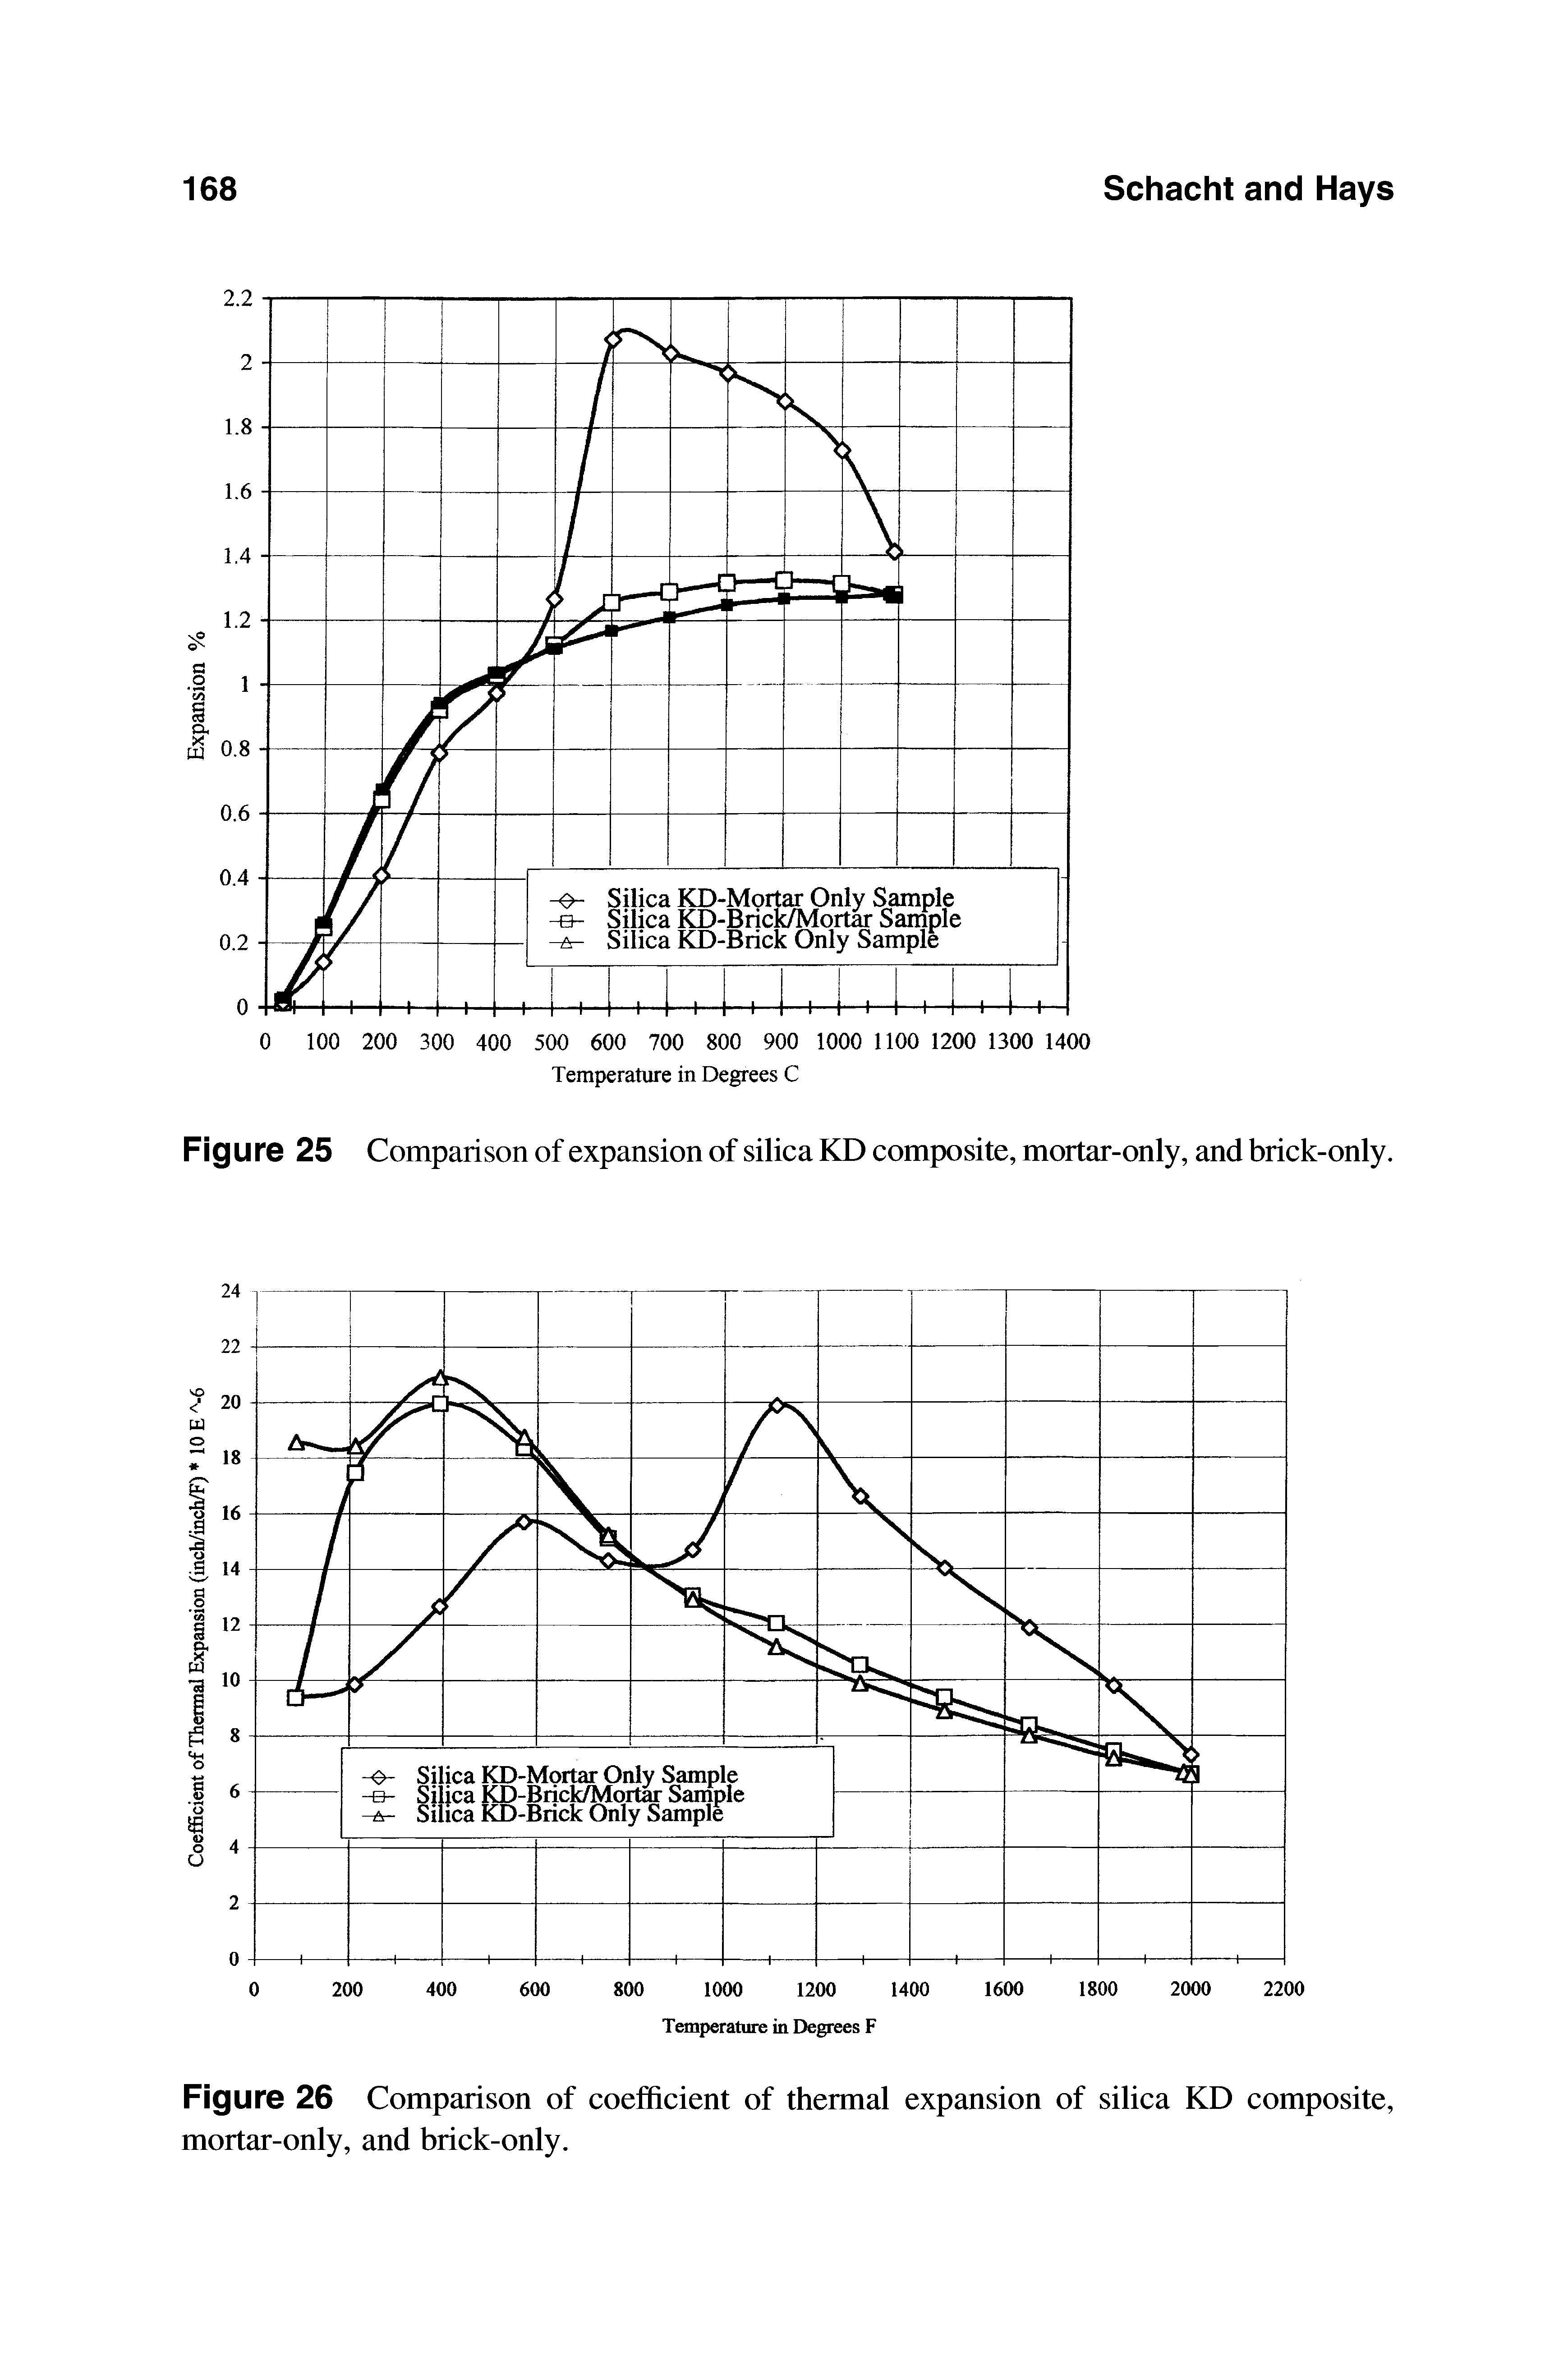 Figure 26 Comparison of coefficient of thermal expansion of silica KD composite, mortar-only, and brick-only.